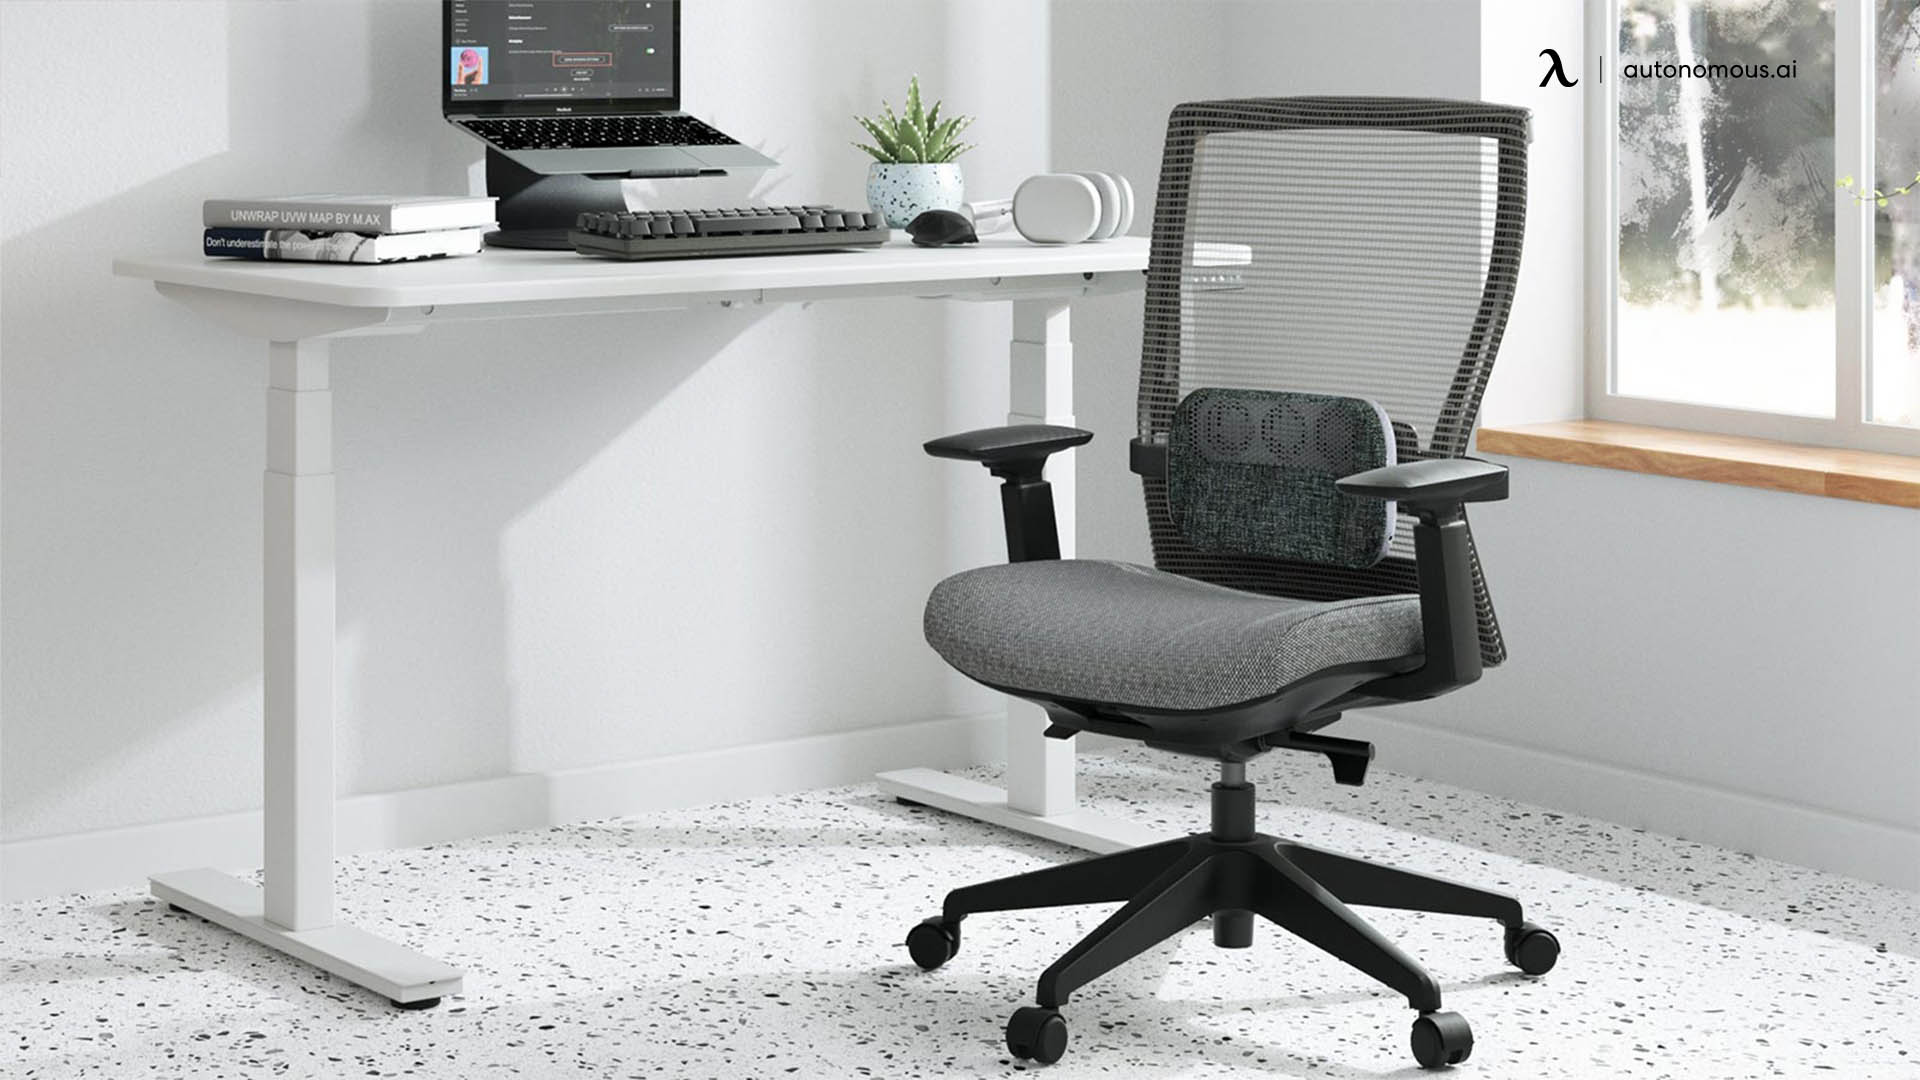 Why Do I Need an Office Chair in My Office? 